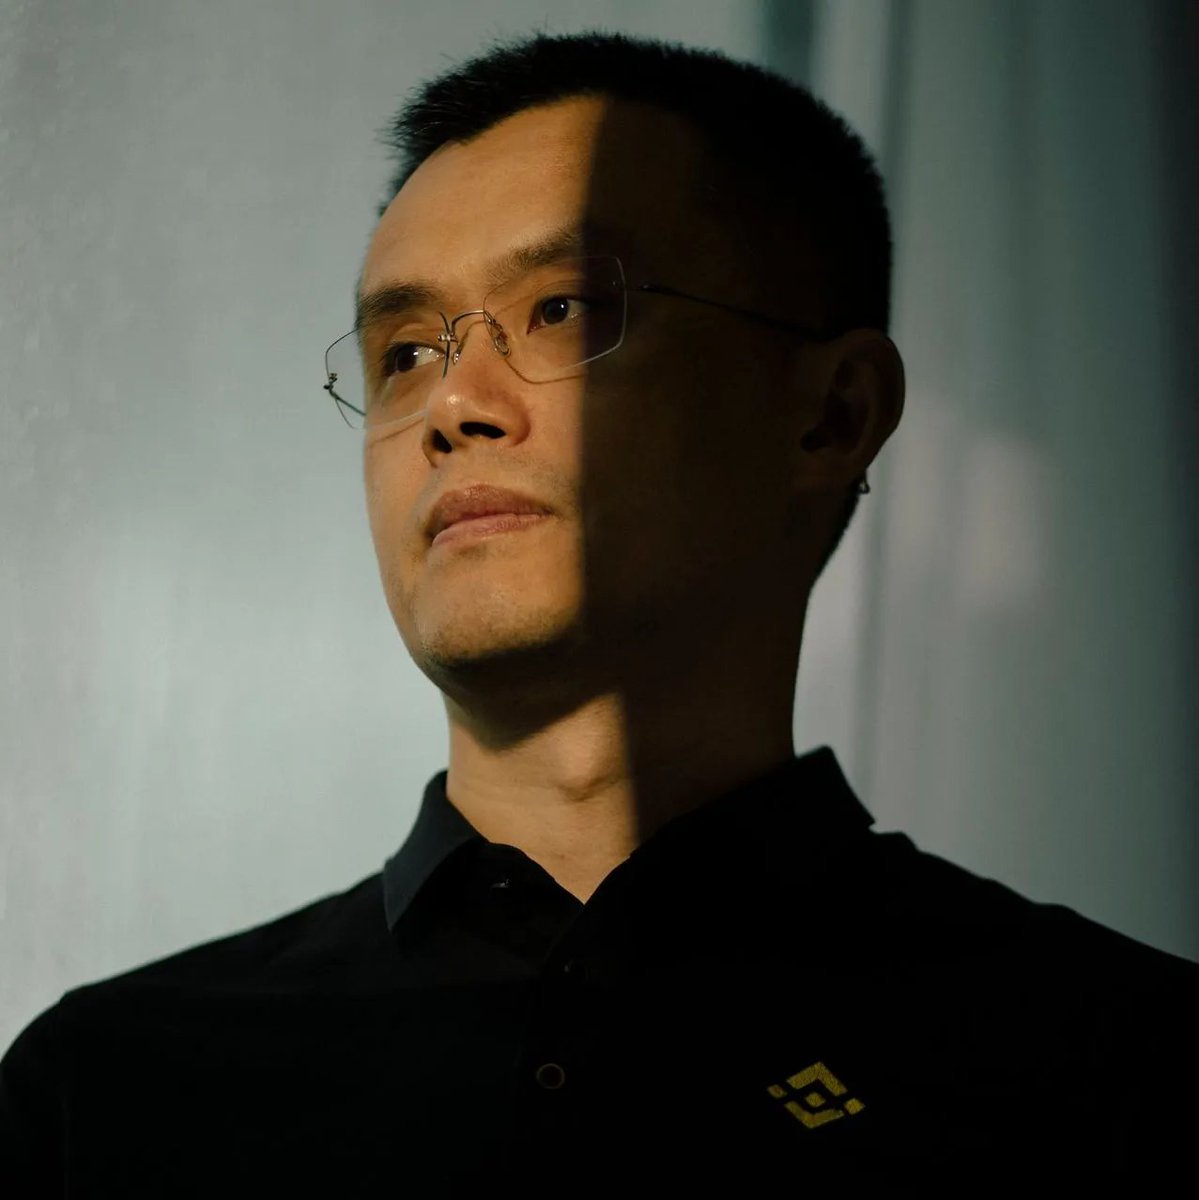 🚨 CZ Binance Sentenced To Four Months In Prison.

@CZ_Binance Founded & Built The Worlds Largest & Most Successful Exchange (@Binance).

CZ Pleaded Guilty To Anti-Money Laundering Violations & Will Most Likely Serve His Sentence At SeaTac, A Federal Prison In The Seattle Area.